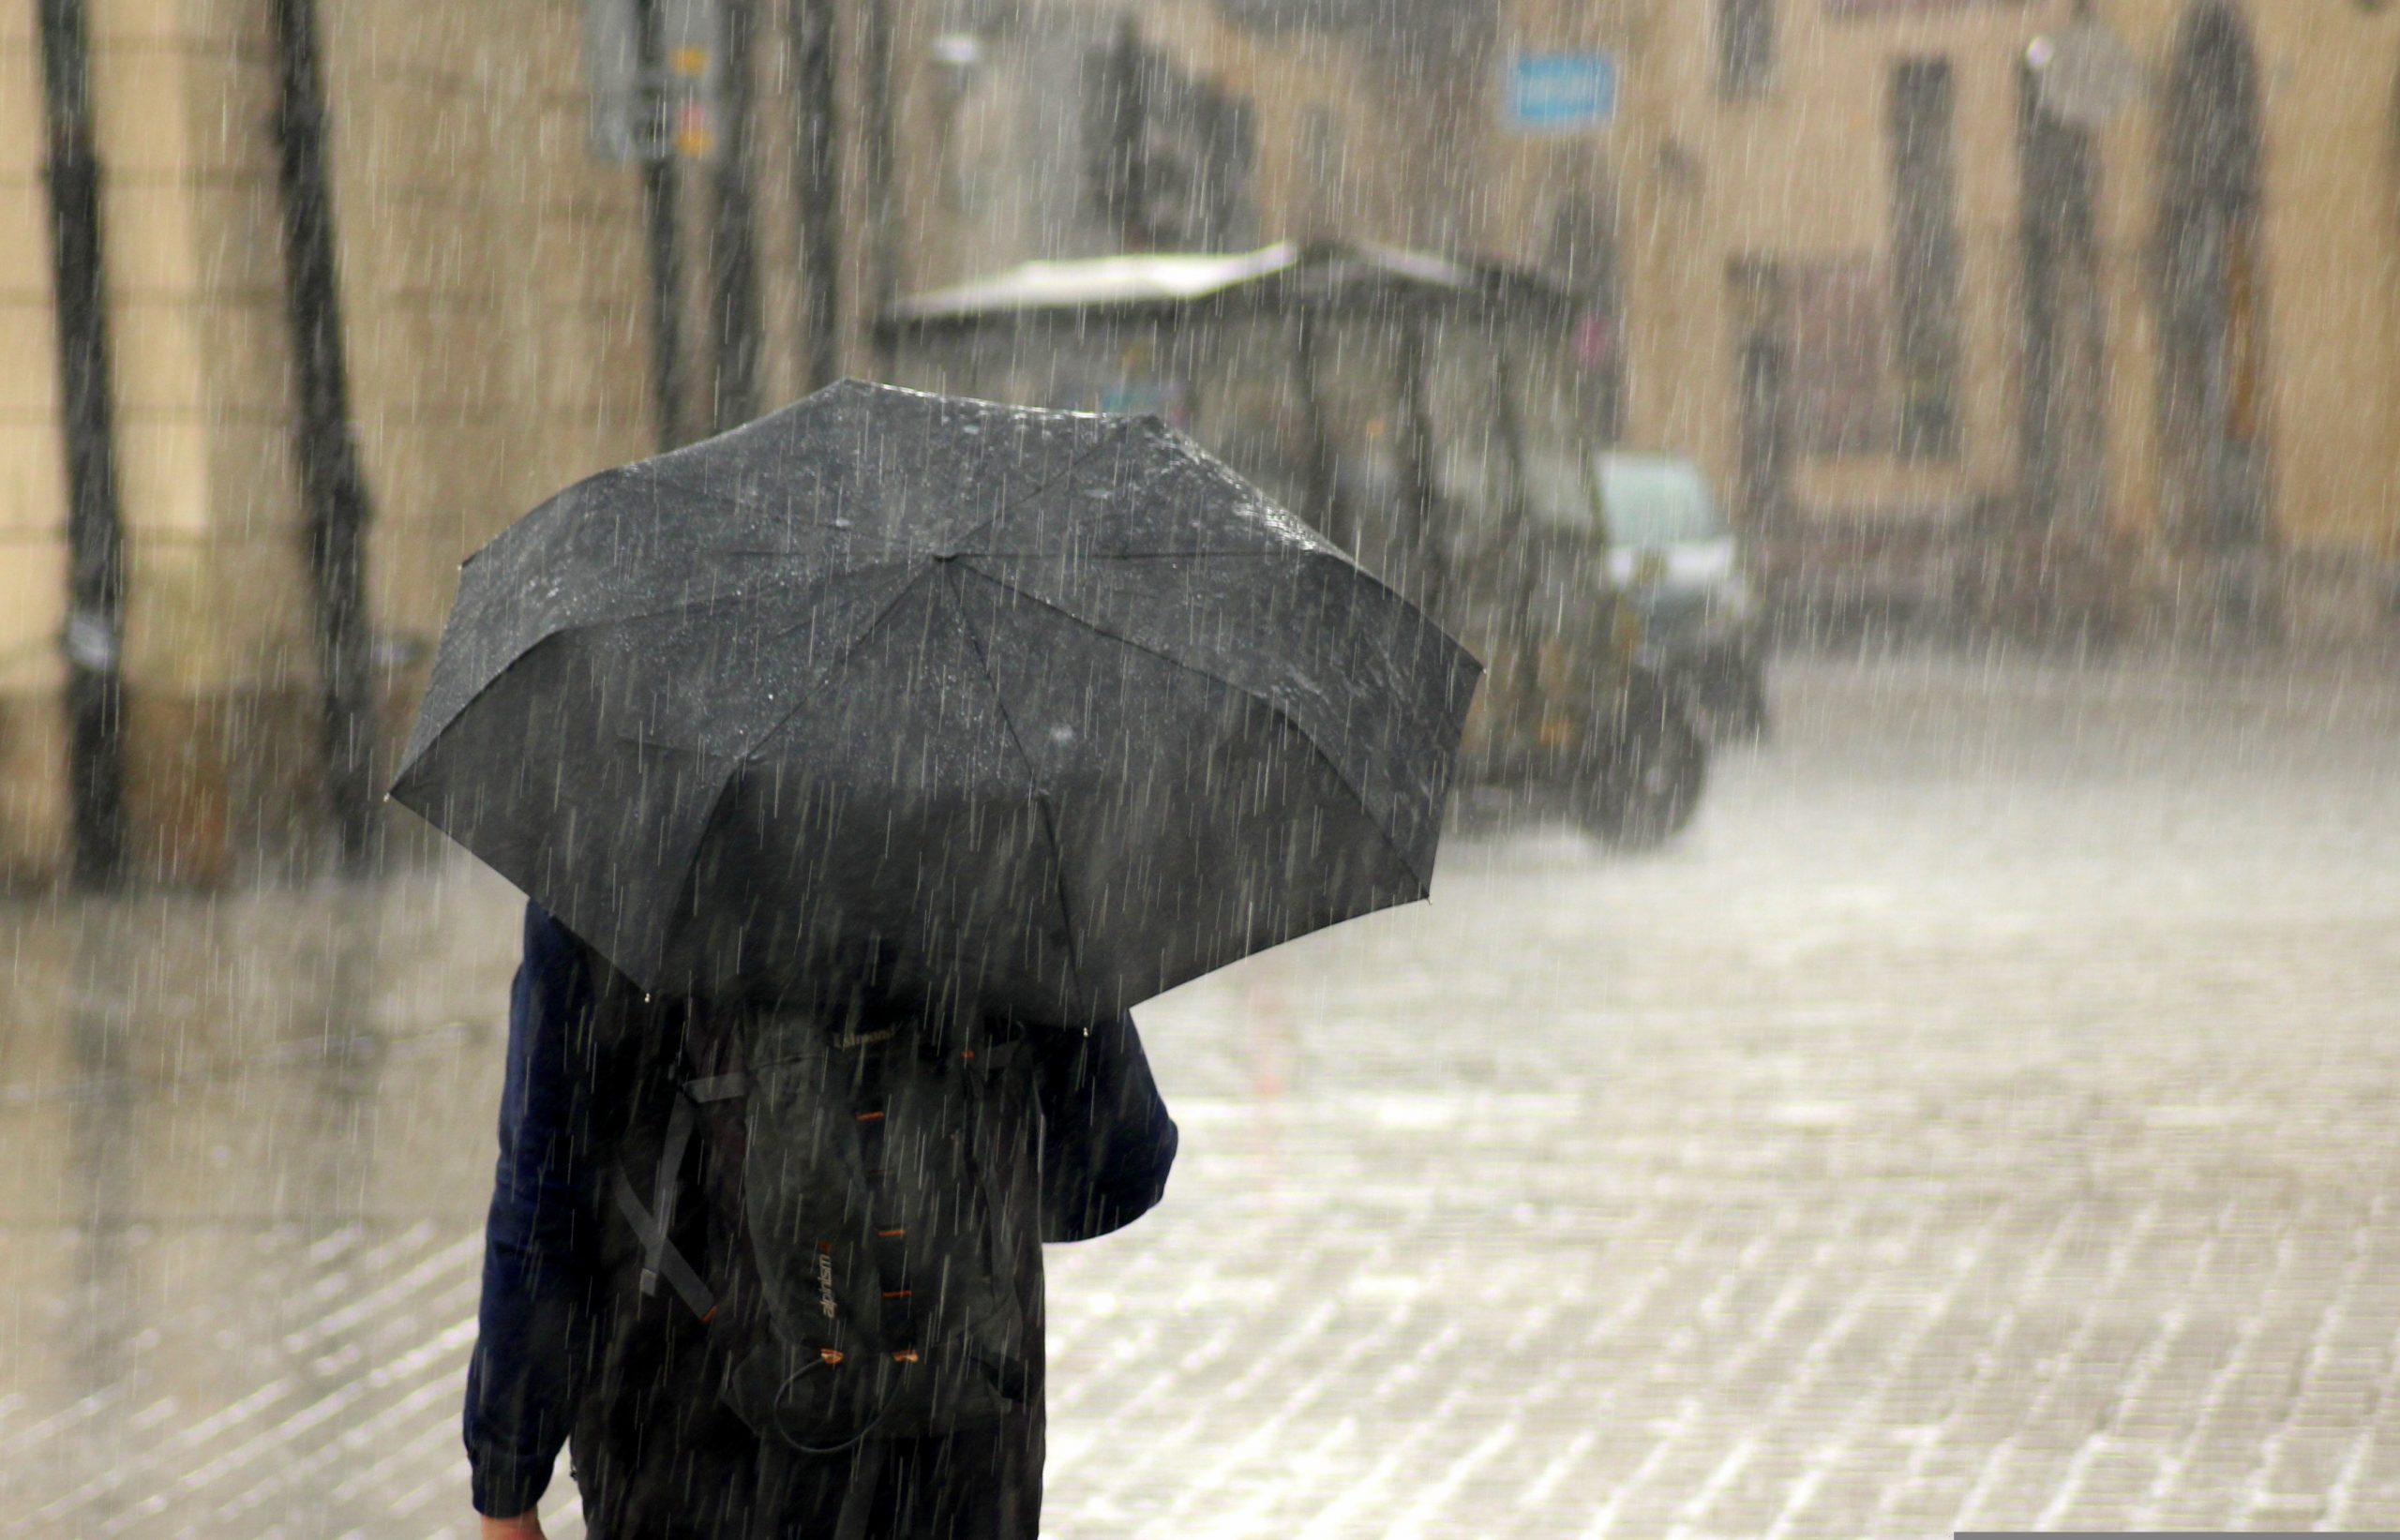 Heavy rainfall to ease drought restrictions in Barcelona area